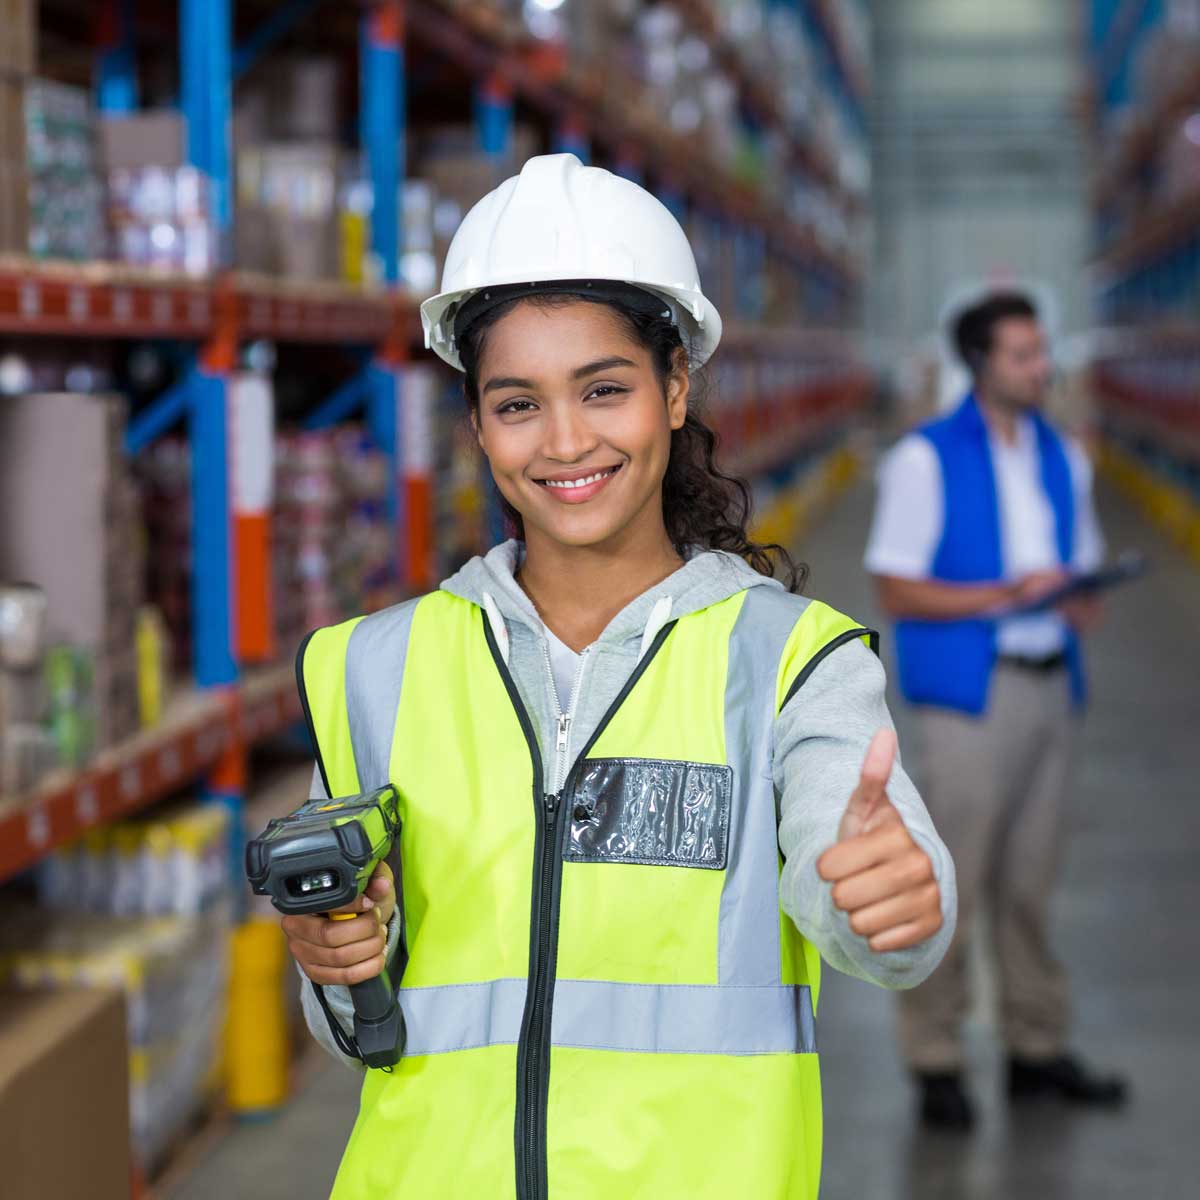 Female warehouse worker showing thumbs up sign